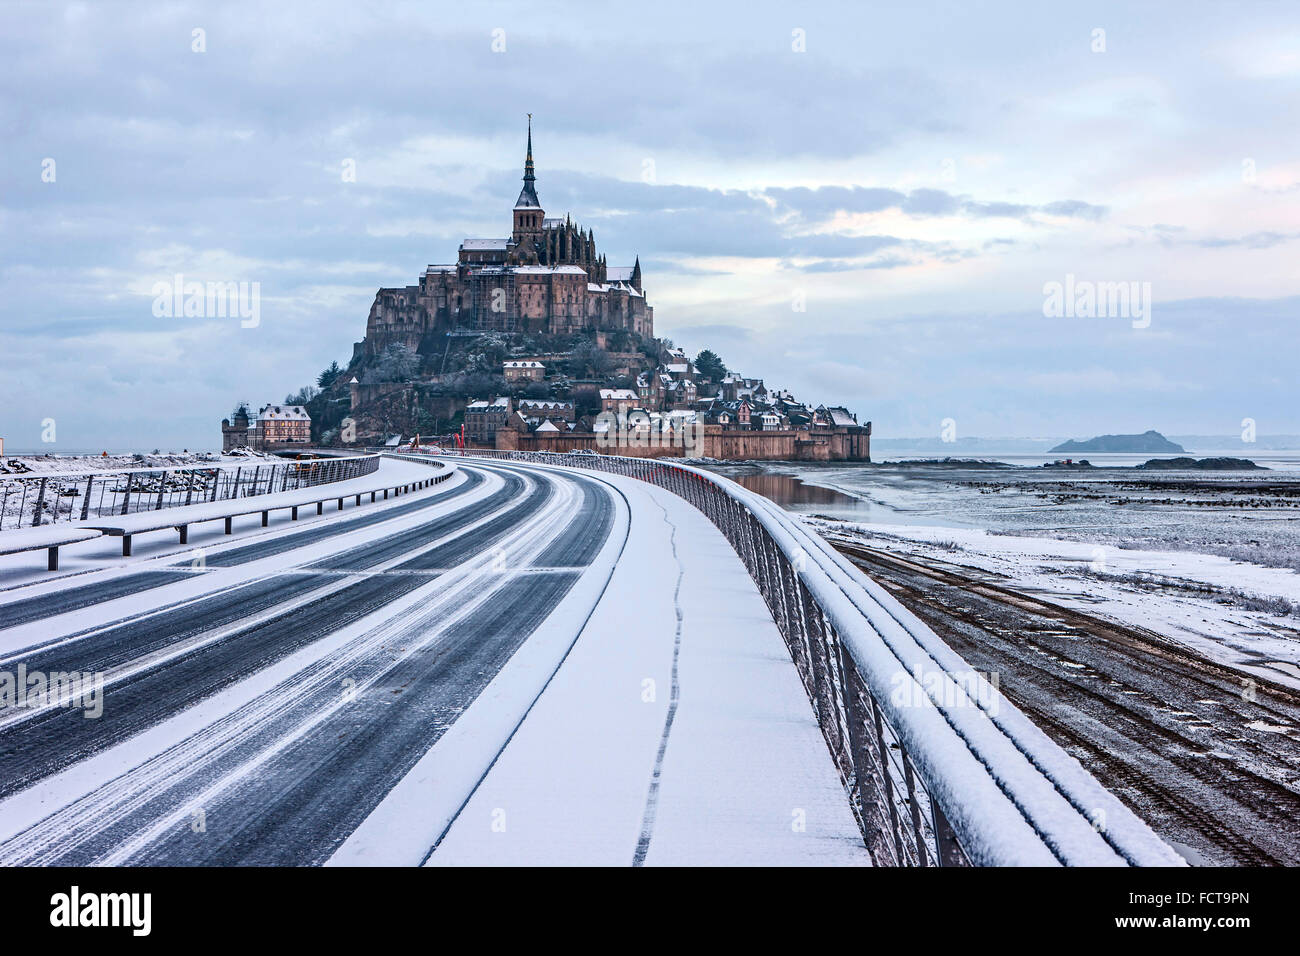 Mont Saint-Michel (Saint Michael's Mount), (Normandy, north-western France), on 2015/02/03: snowfall on the island commune Mont Stock Photo